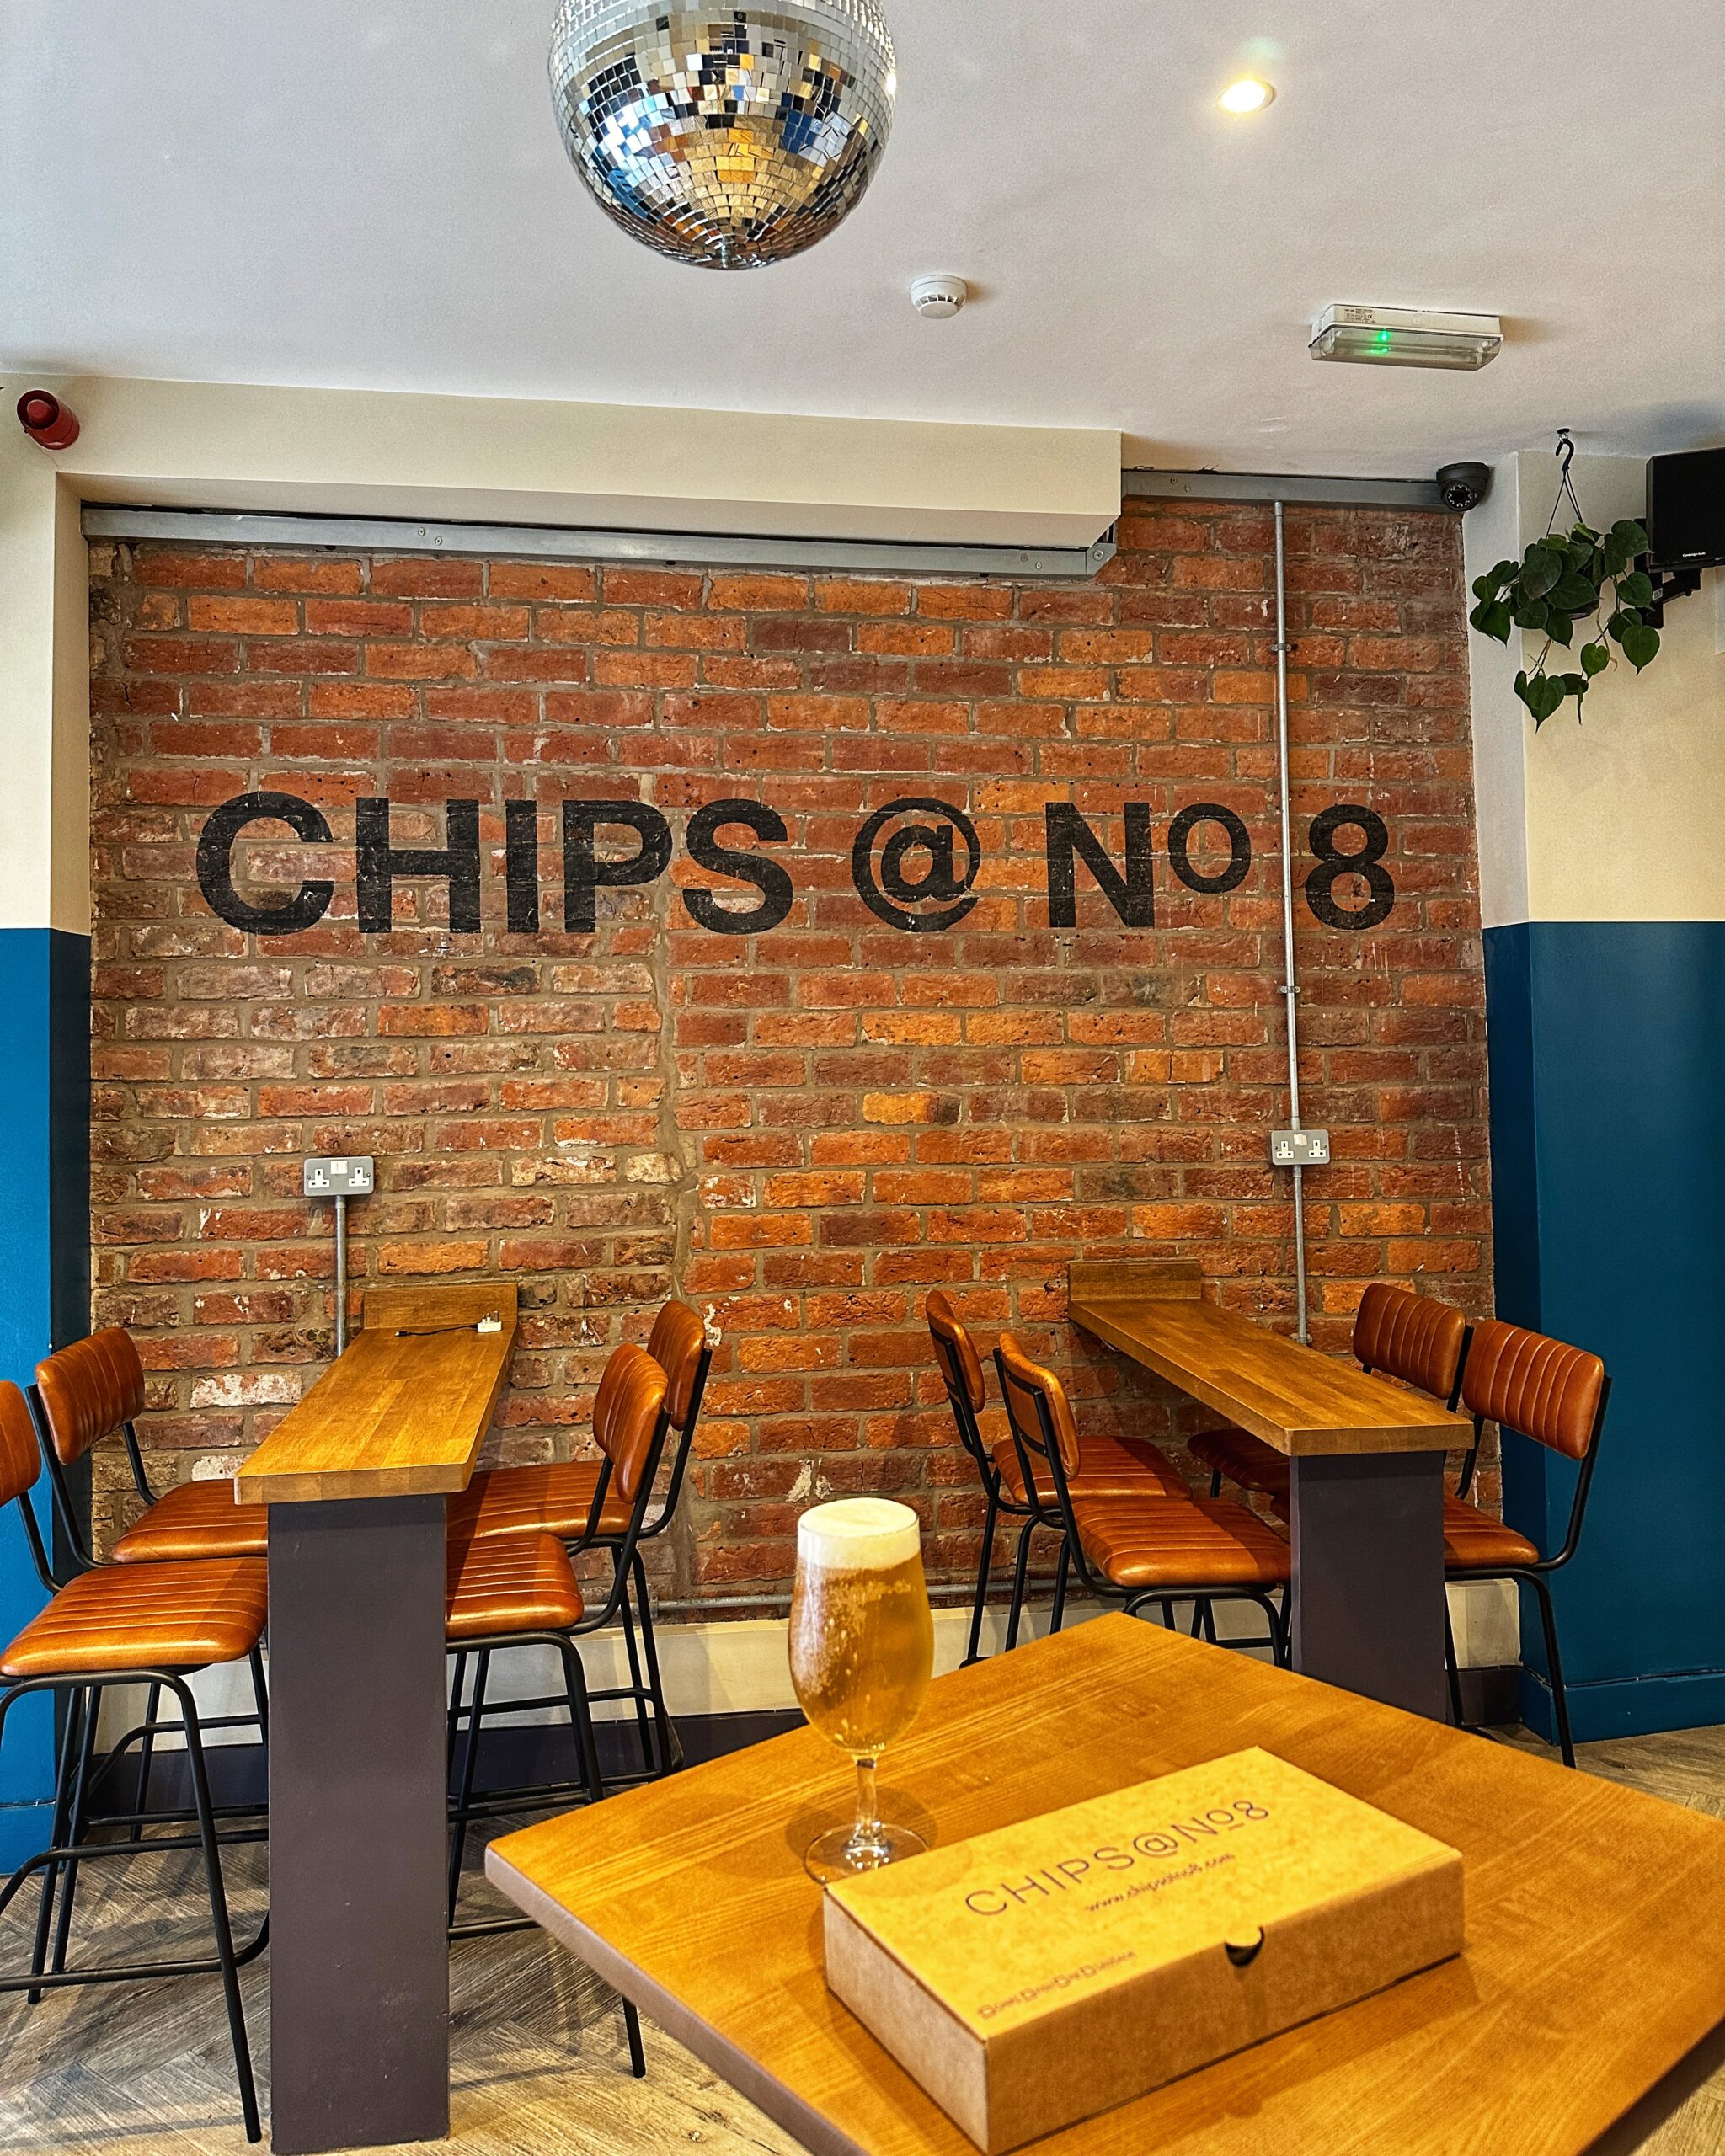 Chips @ No.8 has a new bar space inside where you can eat-in with your chippy